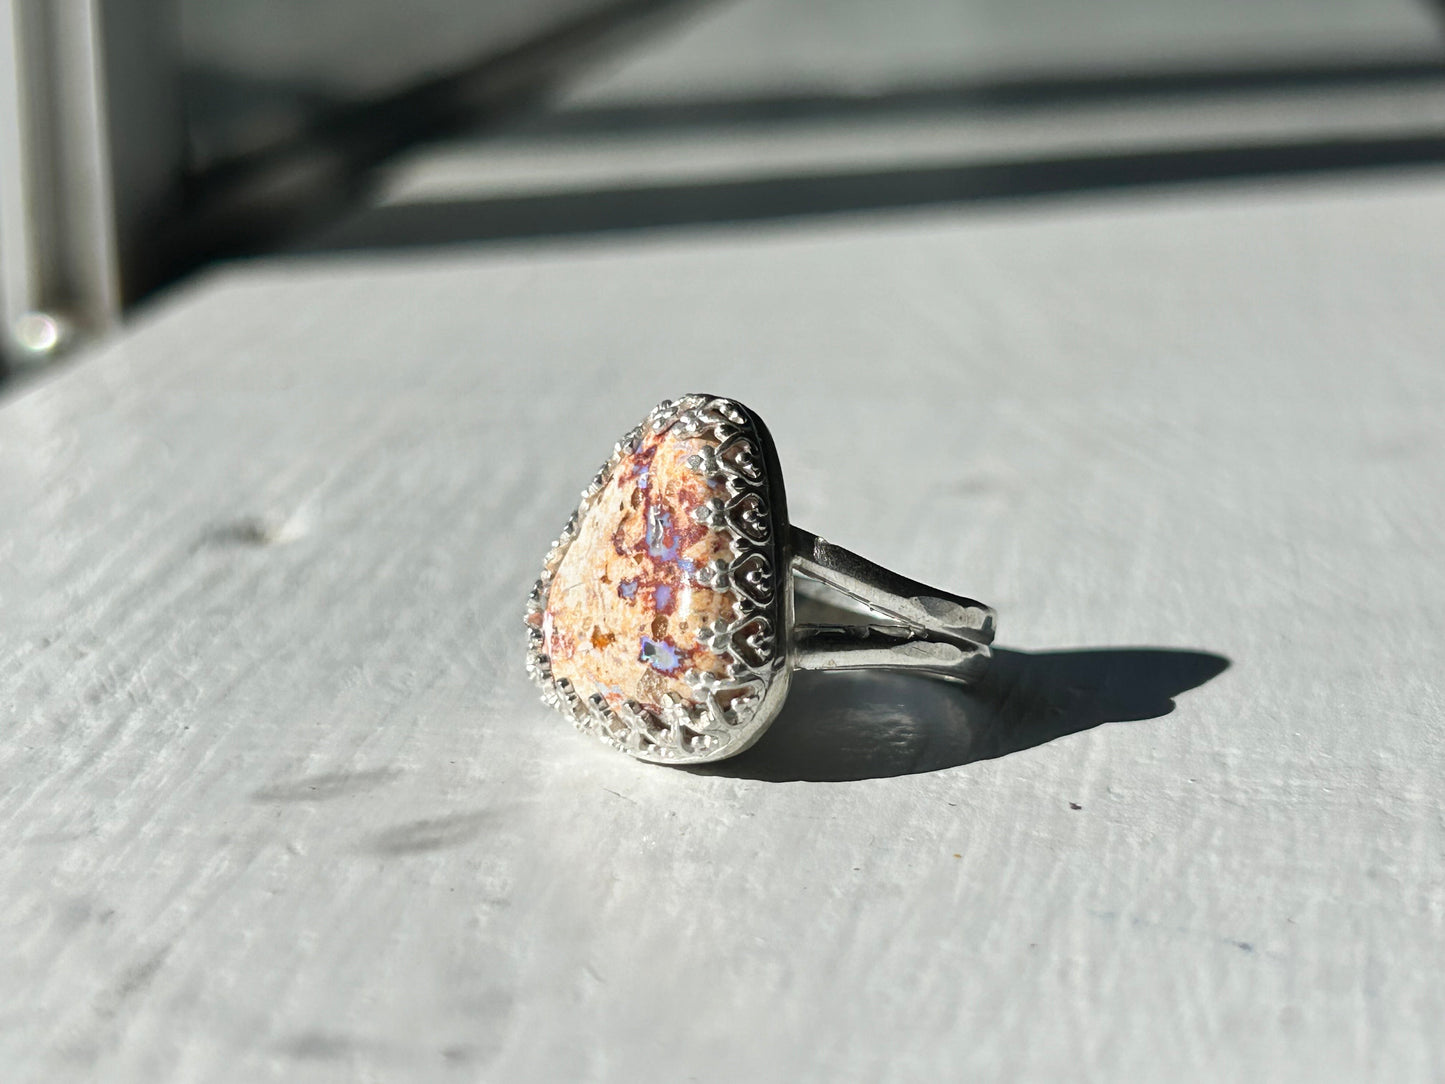 Fire Opal Statement Ring #128-0